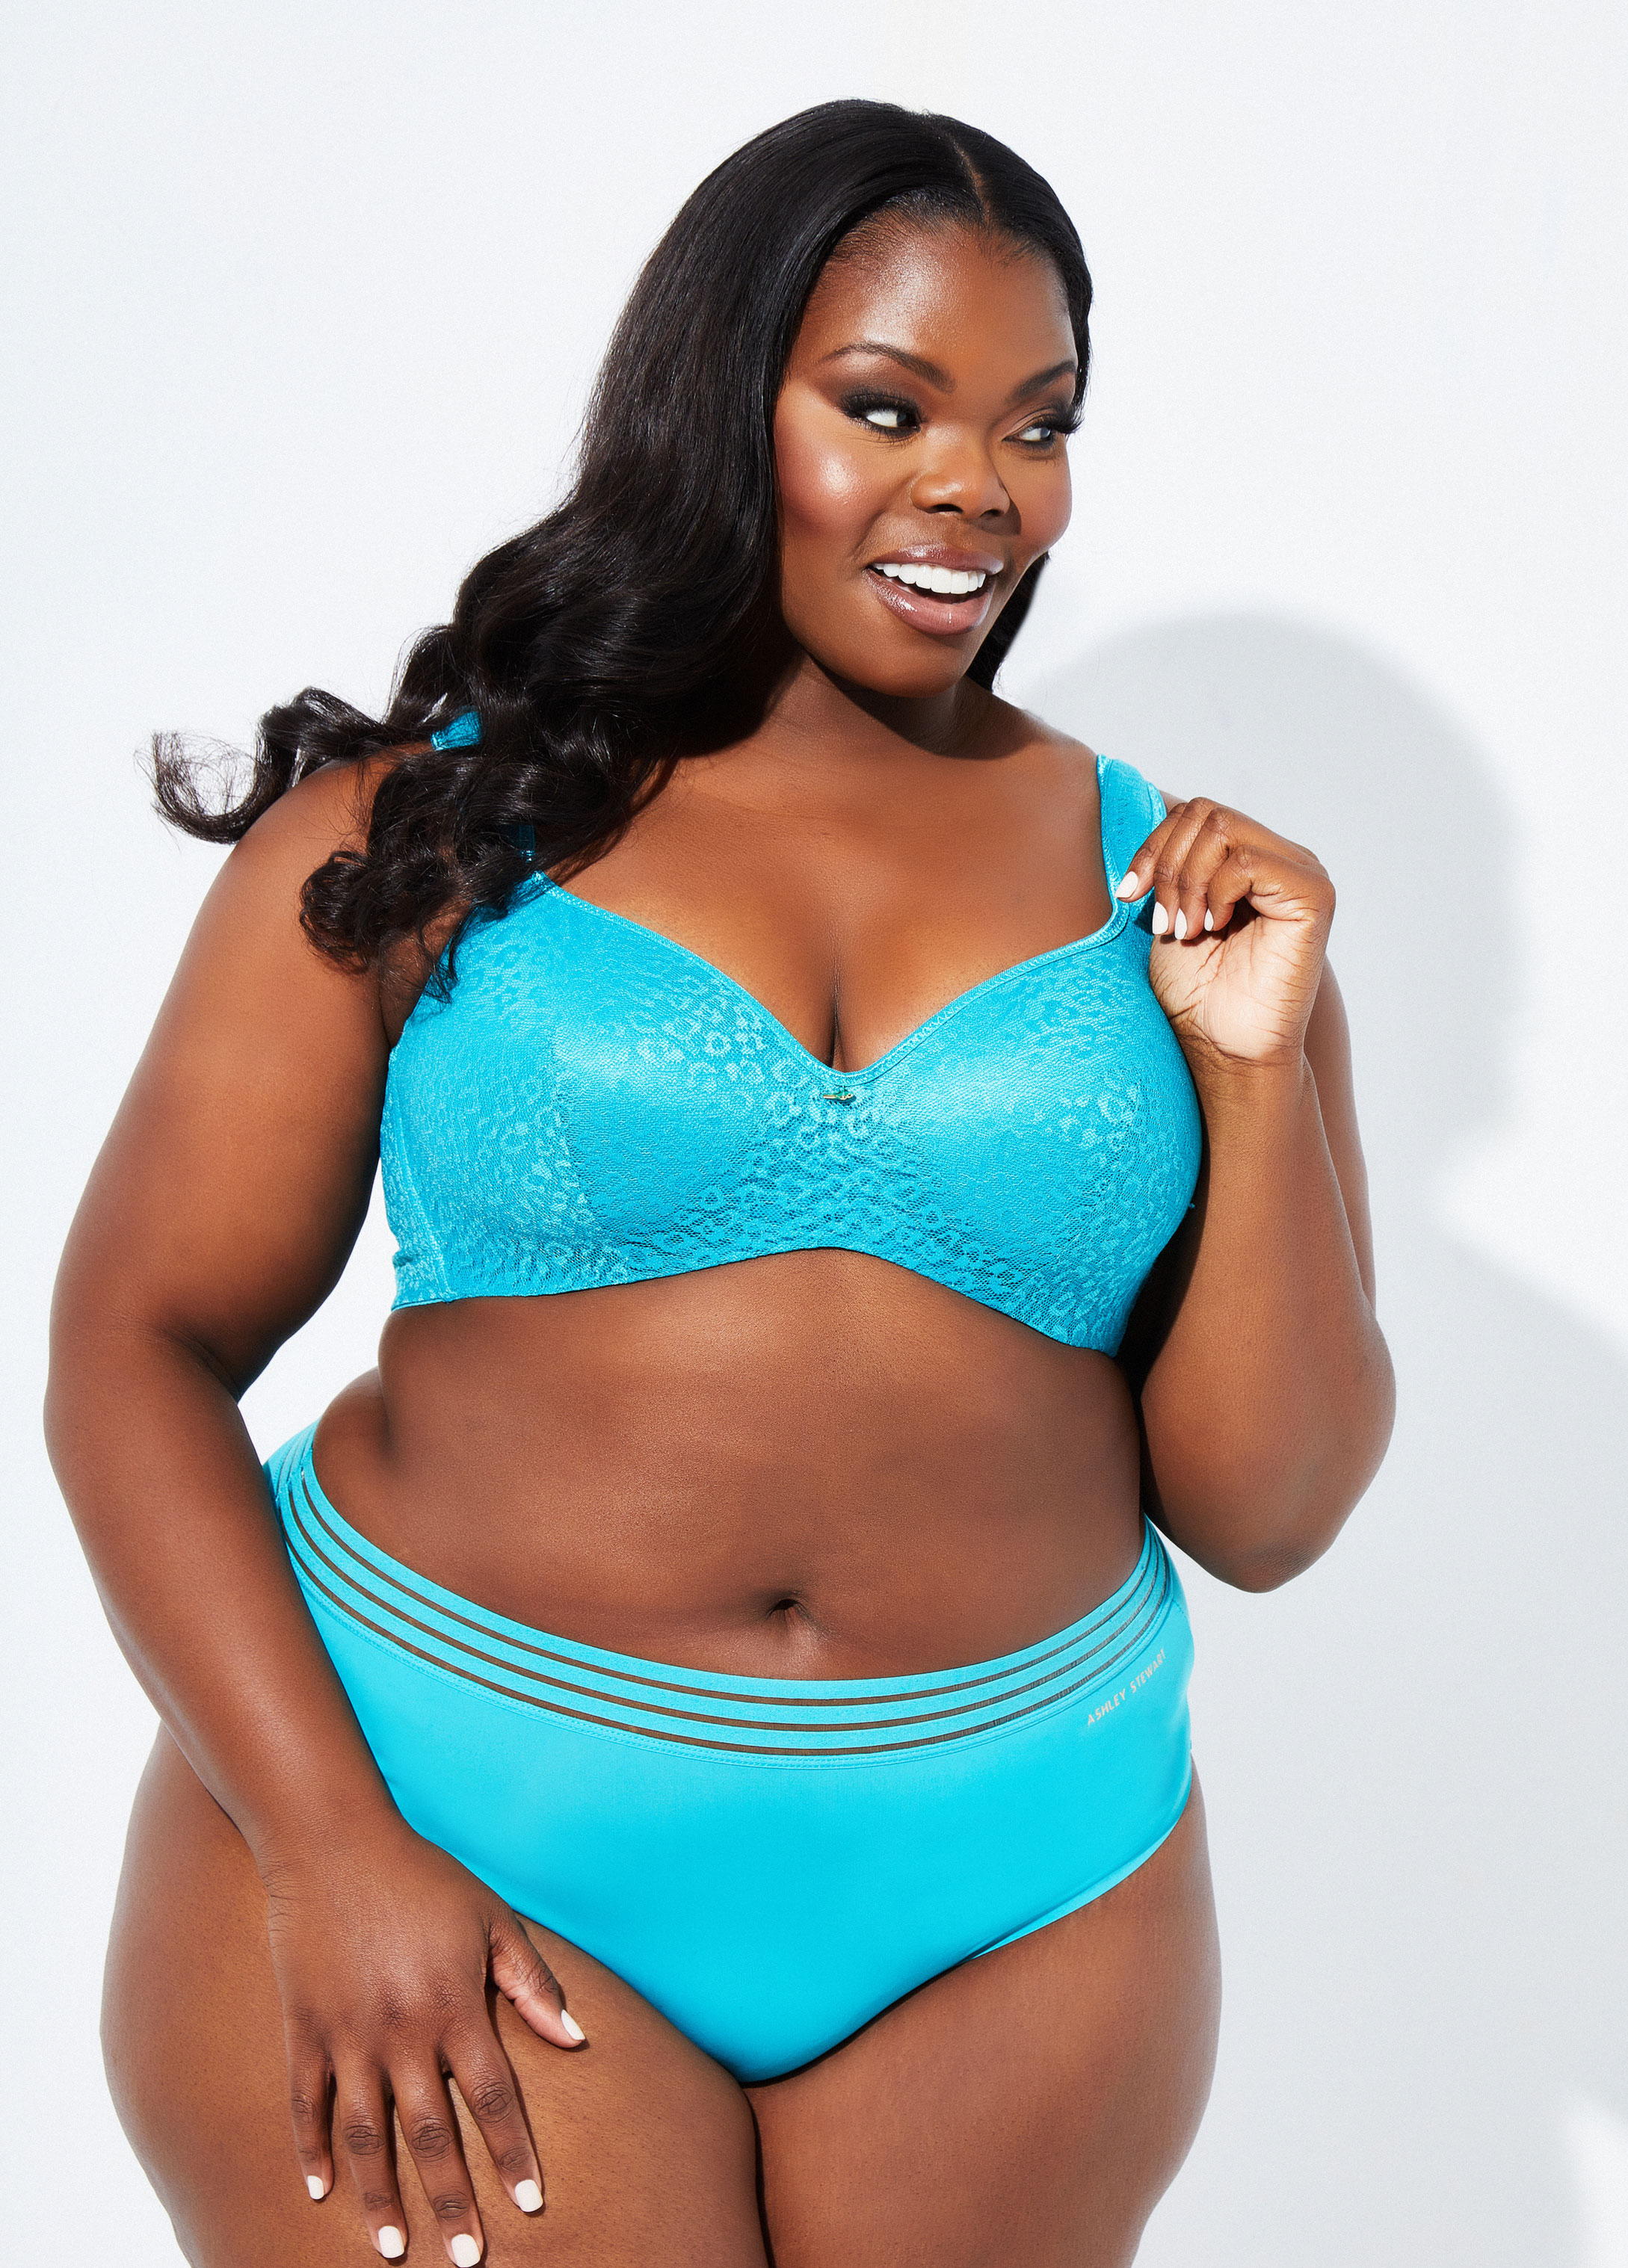 Diva's Curves - Looking for a Quality Plus Size Shapewear